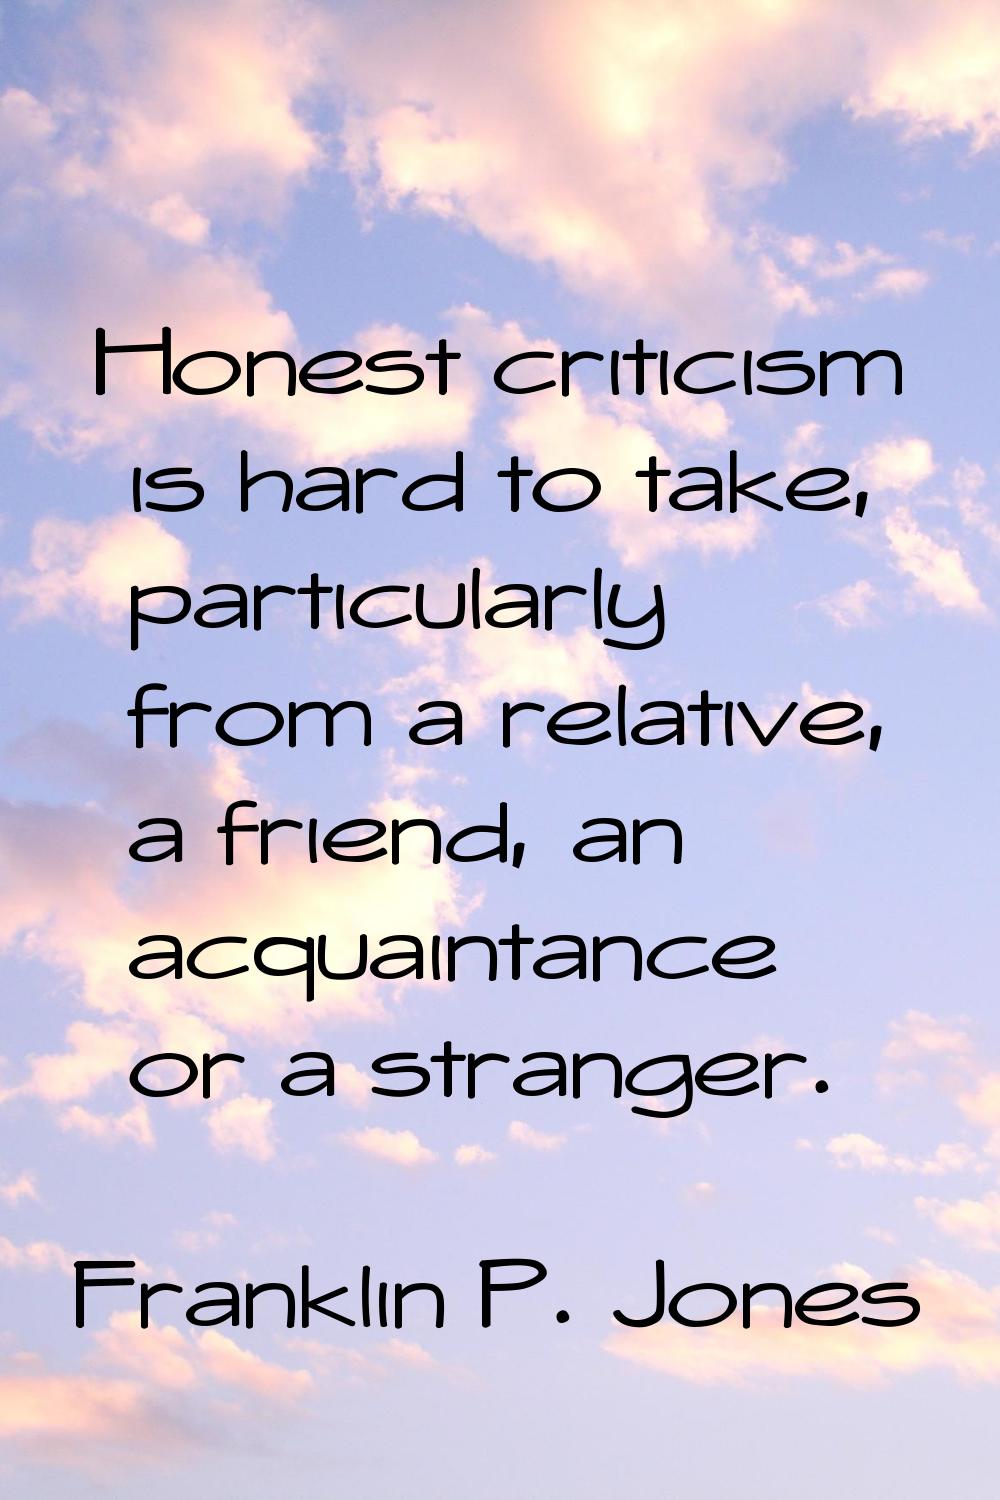 Honest criticism is hard to take, particularly from a relative, a friend, an acquaintance or a stra